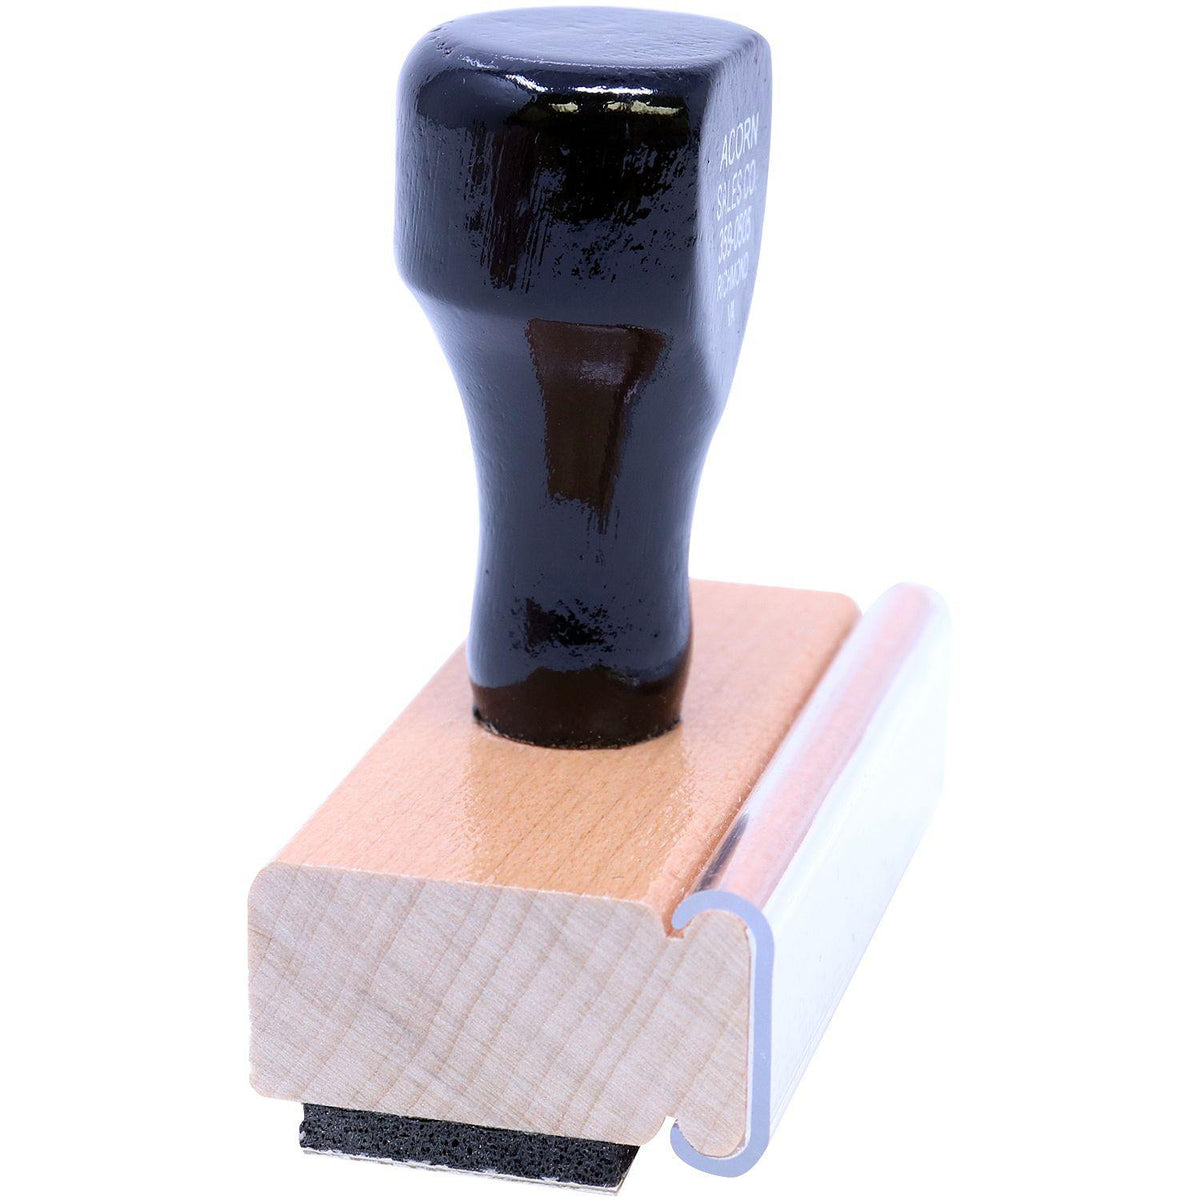 Side View of Large Allergies Rubber Stamp at an Angle